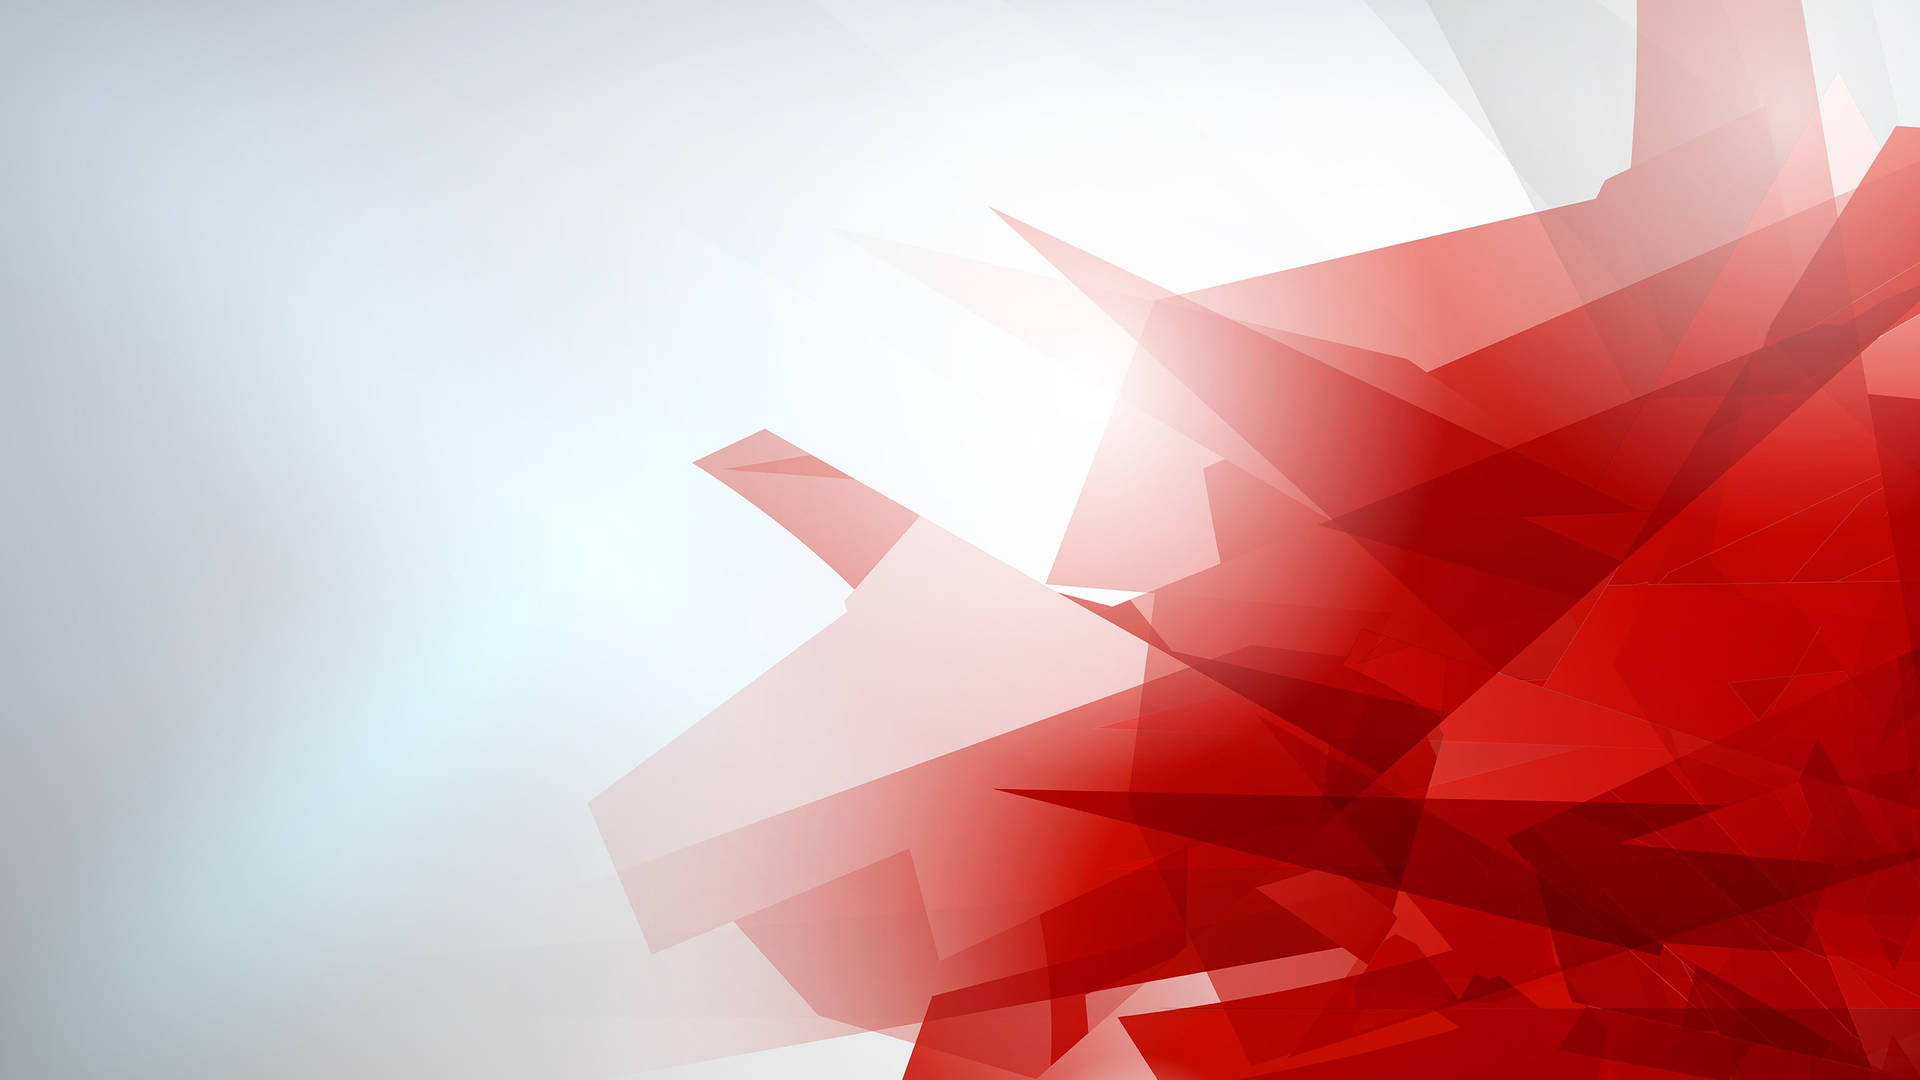 White And Red Abstract Geometric Shapes Wallpaper